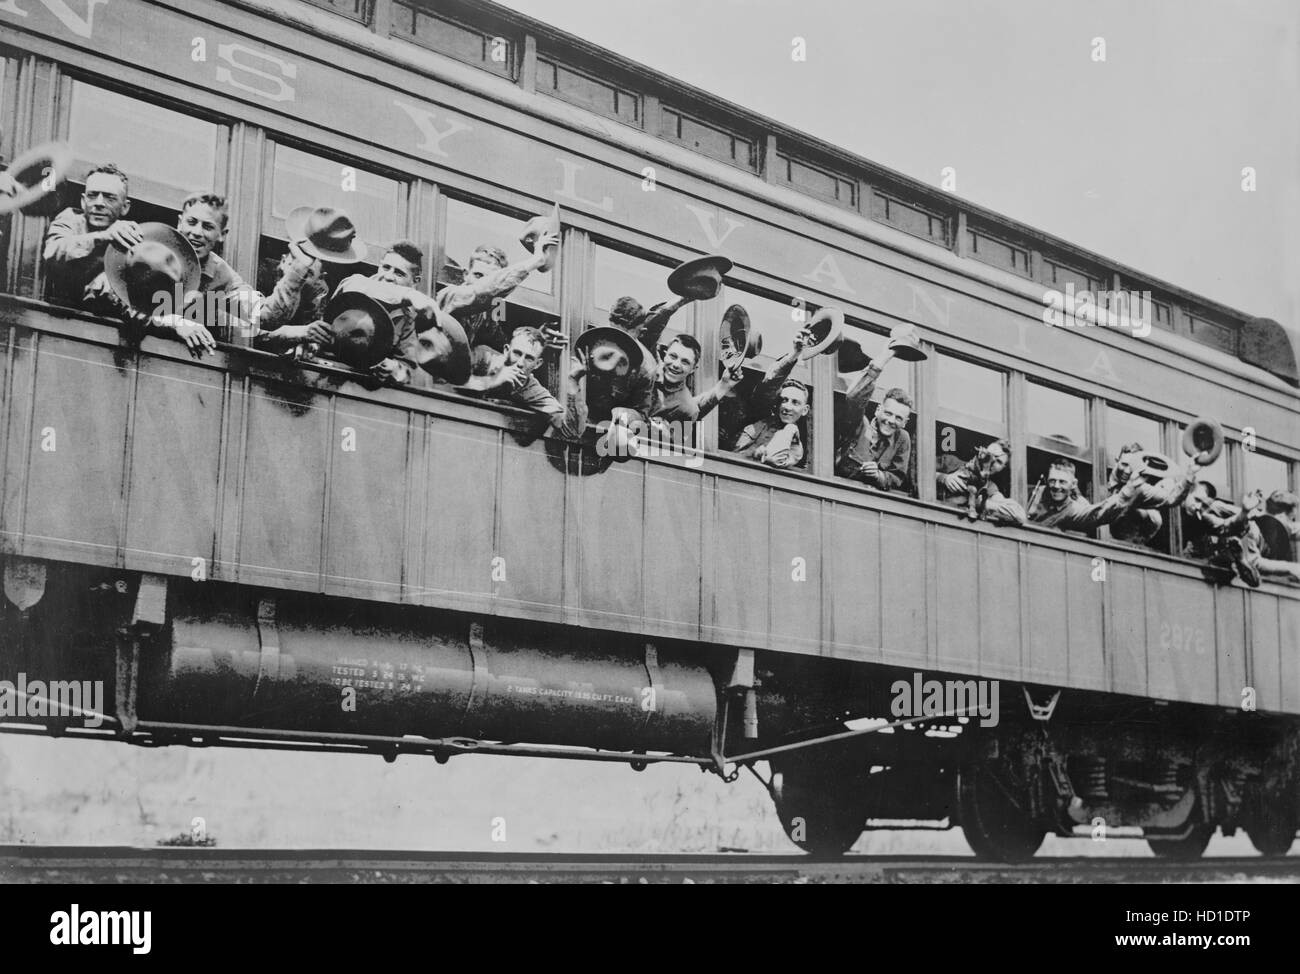 Soldiers of 5th Marine Infantry Regiment on Train enroute to Port of New York for Shipment to France during World War I, New York City, New York, USA, Bain News Service,  June 1917 Stock Photo